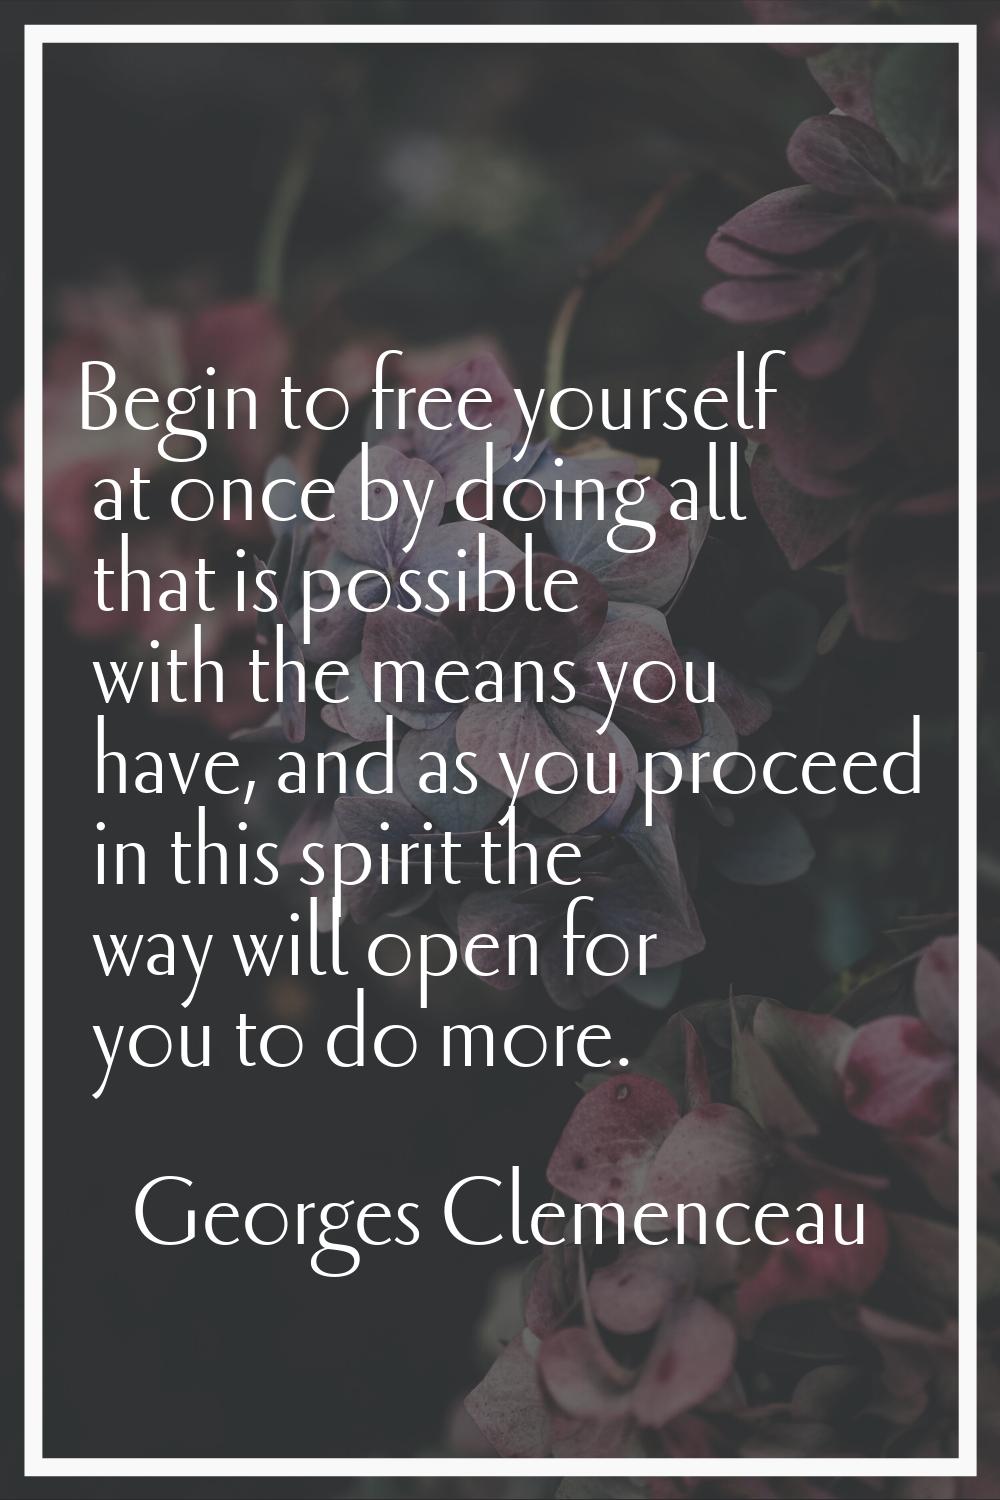 Begin to free yourself at once by doing all that is possible with the means you have, and as you pr